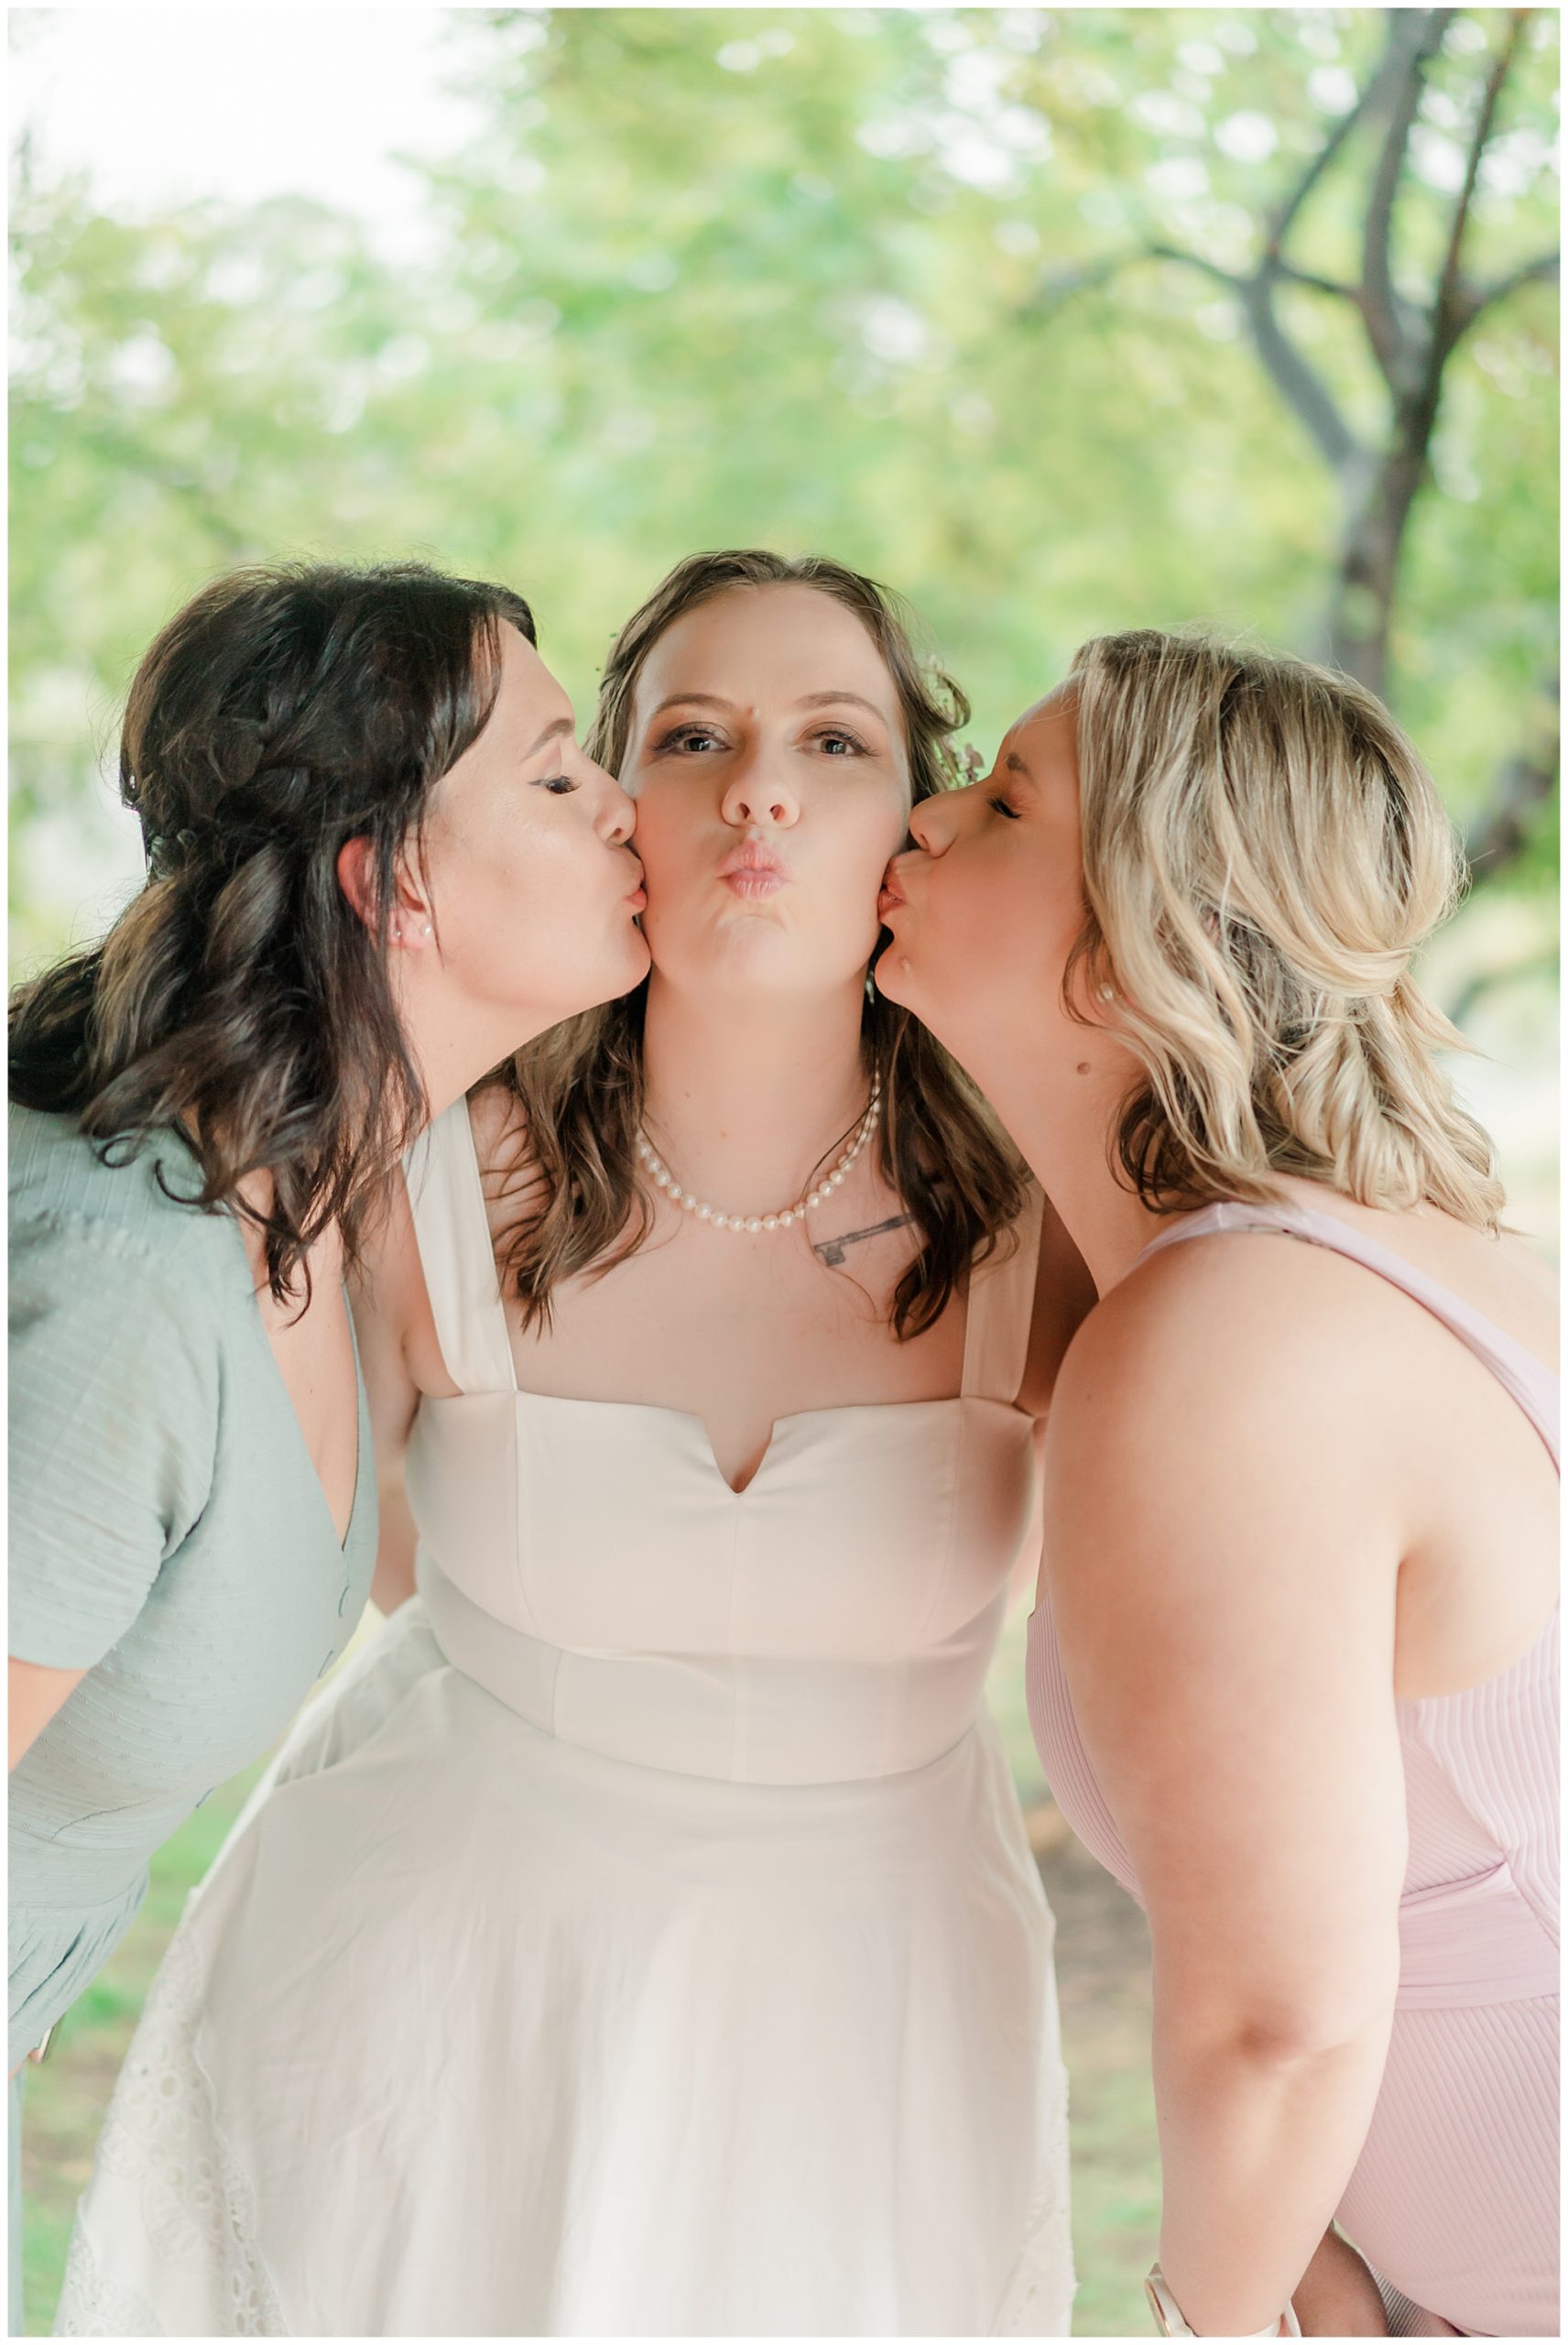 Bride having fun with her friends  on her wedding day 